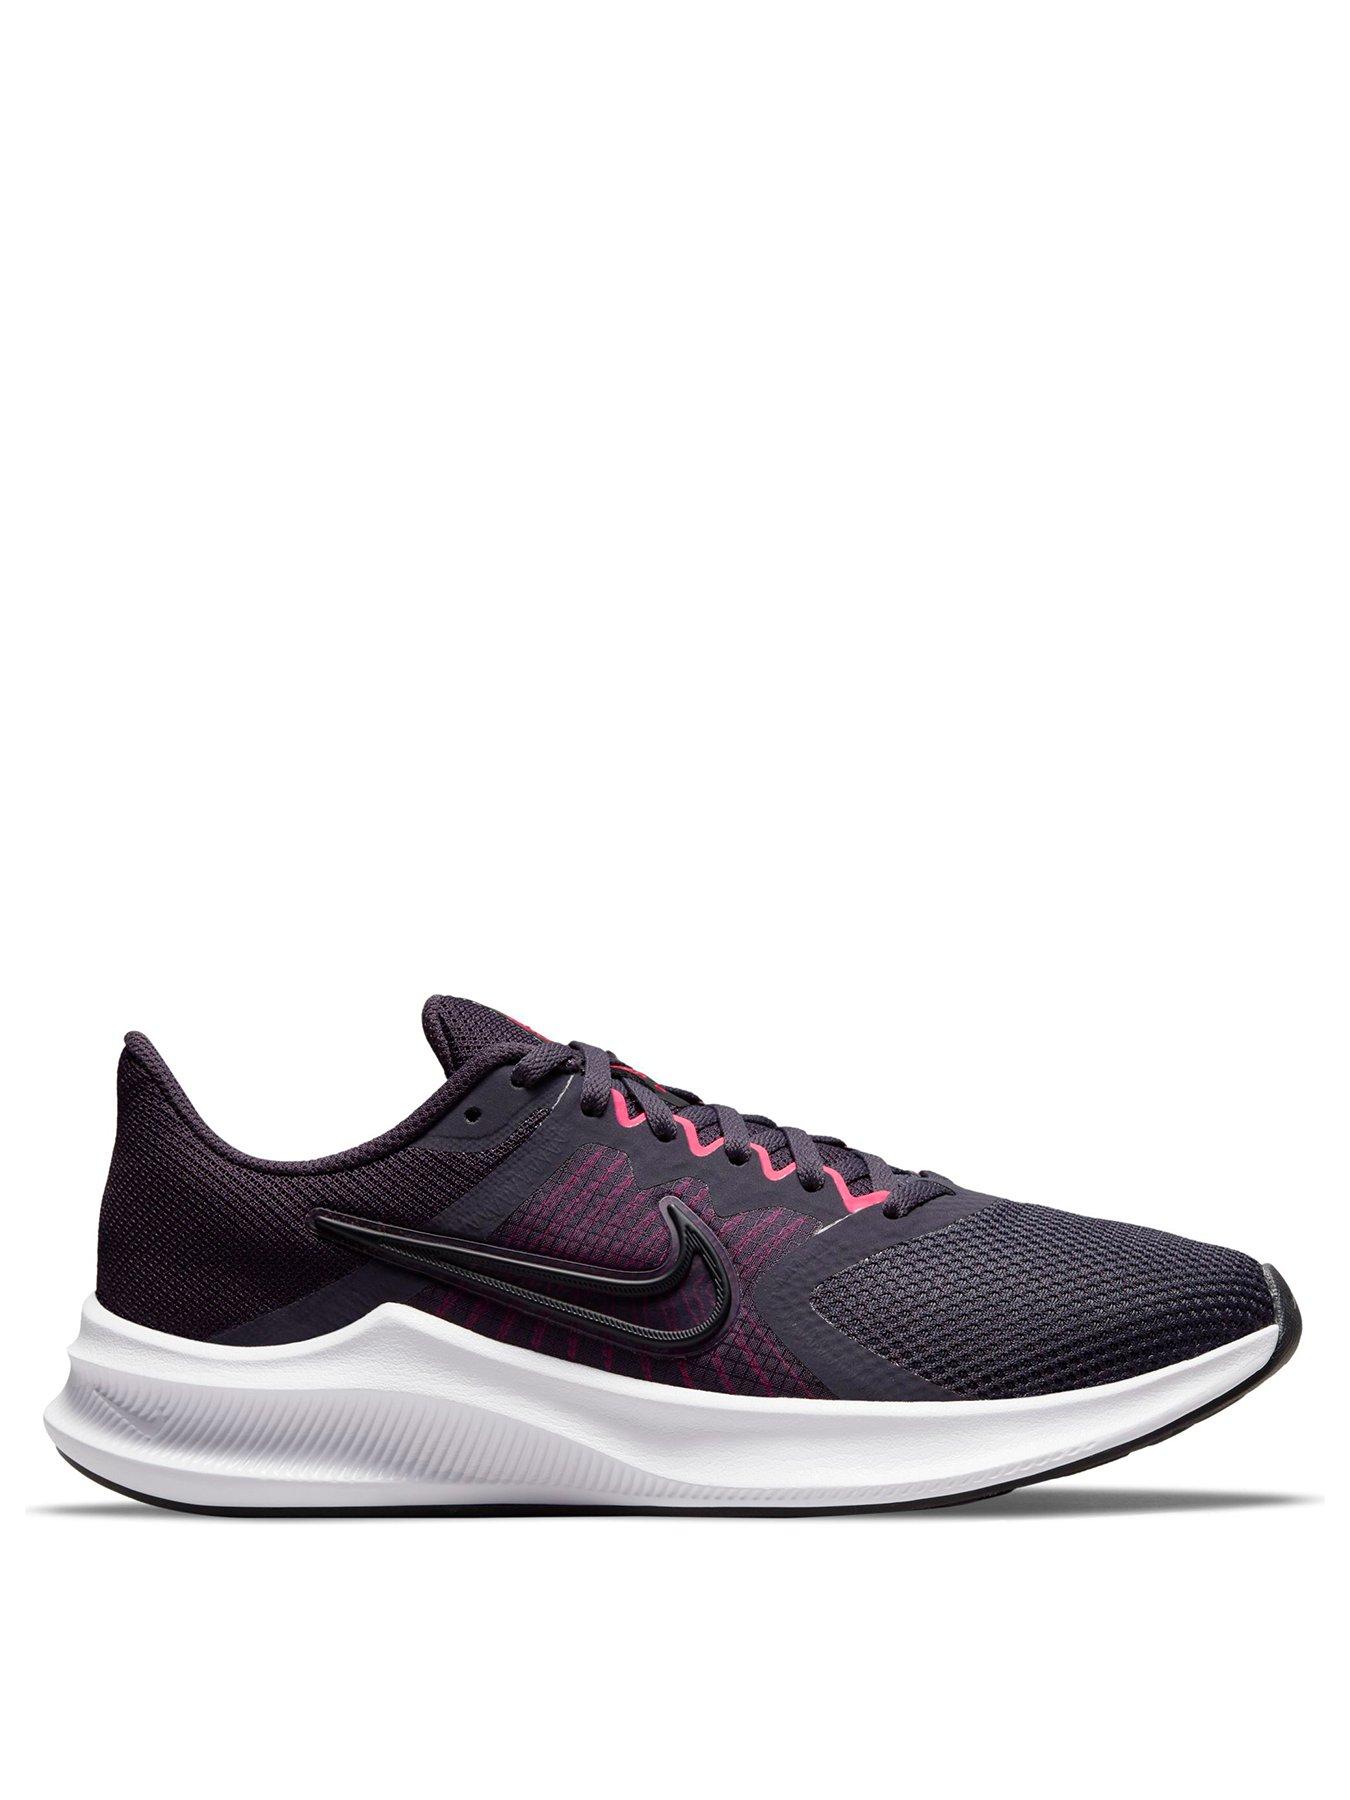 Trainers Downshifter 11 - Black/Pink/White